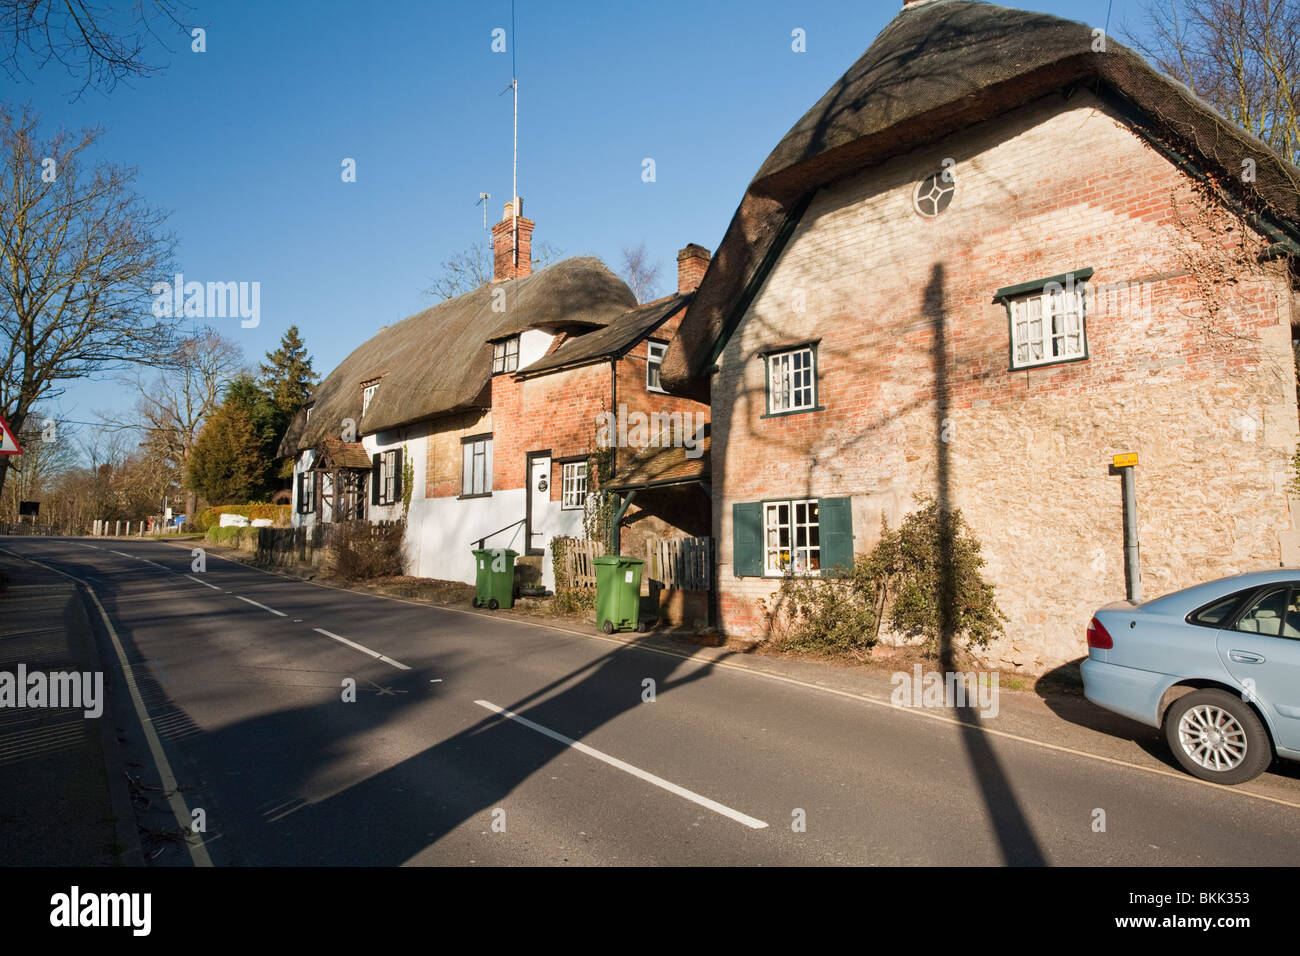 Traditional thatched cottages in the Thames village of Clifton Hampden, Oxfordshire, Uk Stock Photo